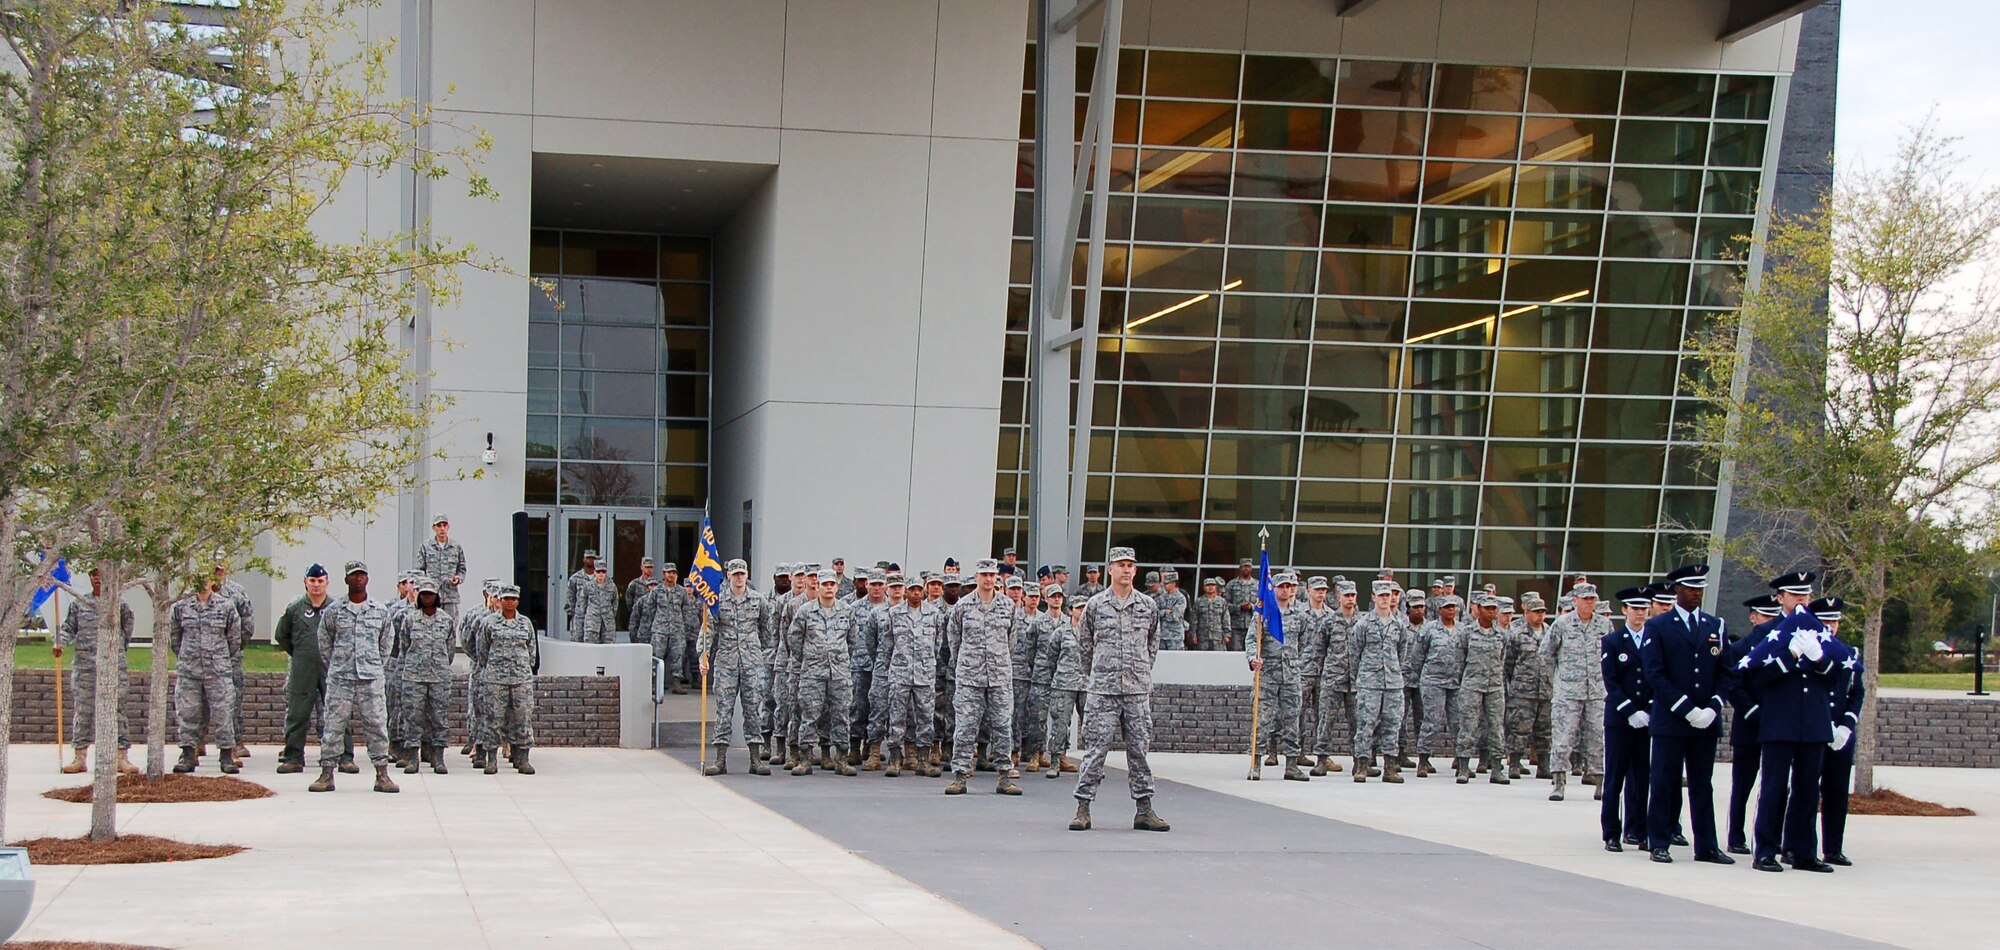 BOSSIER CITY, La. - Members of the Eighth Air Force Headquarters, 608th Air and Space Operations Center and 608th Air Communications Squadron stand in formation for a reveille ceremony at the Cyber Innovation Center in celebration of the Air Force’s 64th birthday Sept. 16. Sixty-four years ago, President Harry Truman signed the National Security Act of 1947, establishing the United States Air Force as a separate military service. Since Sept. 18, 1947, the U.S. Air Force – through its Airmen and technology – has played a key role in the defense of the U.S., maintenance of peace and humanitarian operations around the world. (U.S. Air Force photo by Staff Sgt. Brian Stives)